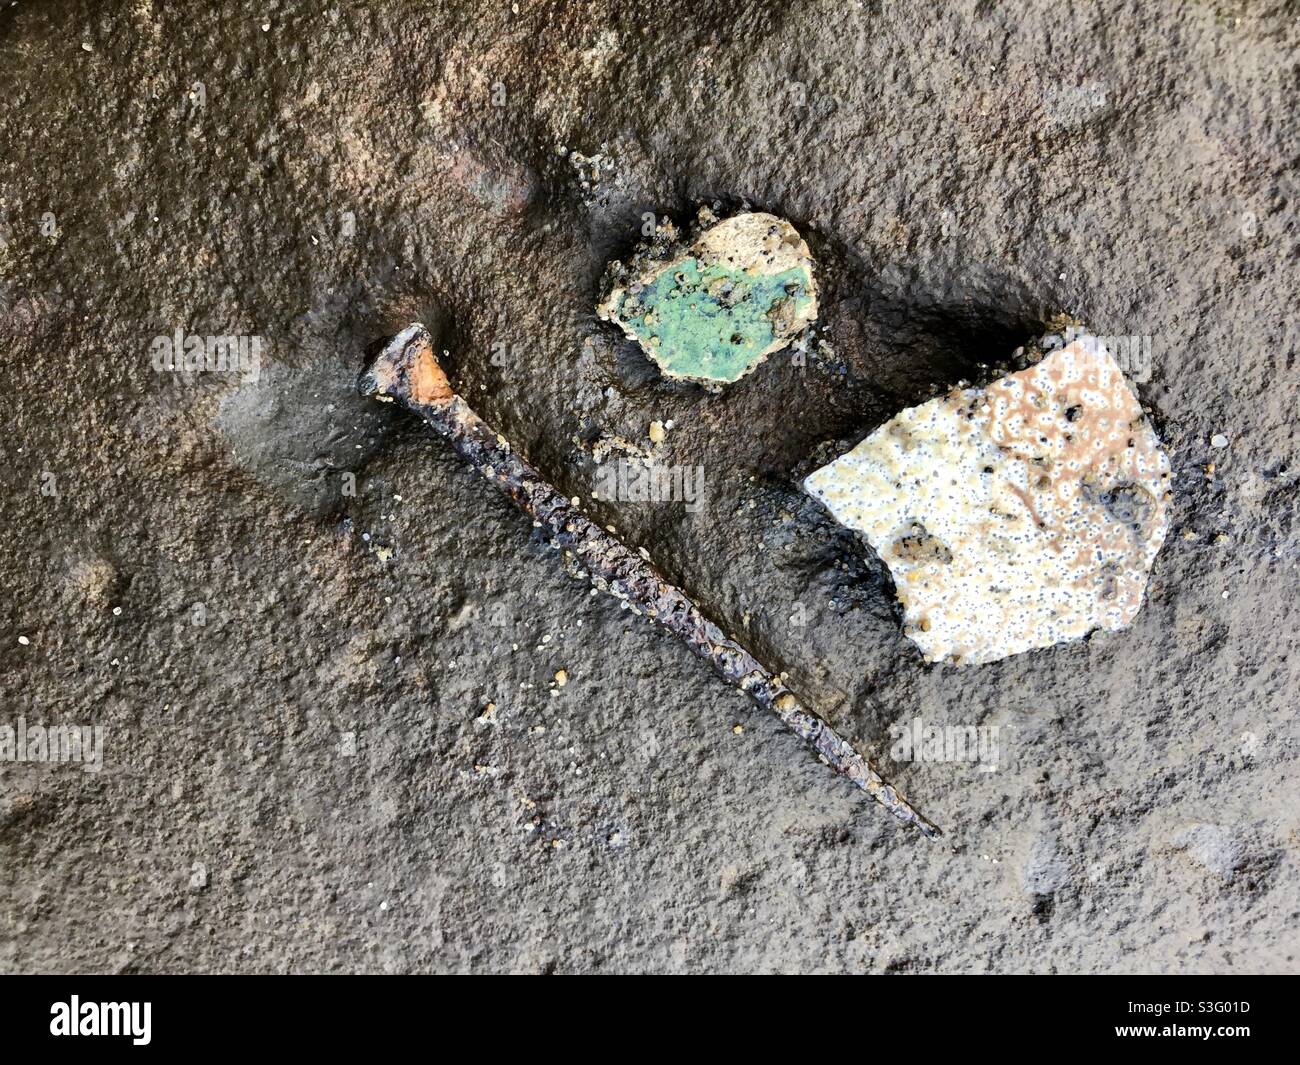 Anaerobic Mud of River Thames preserved old nail and pottery shards Stock Photo